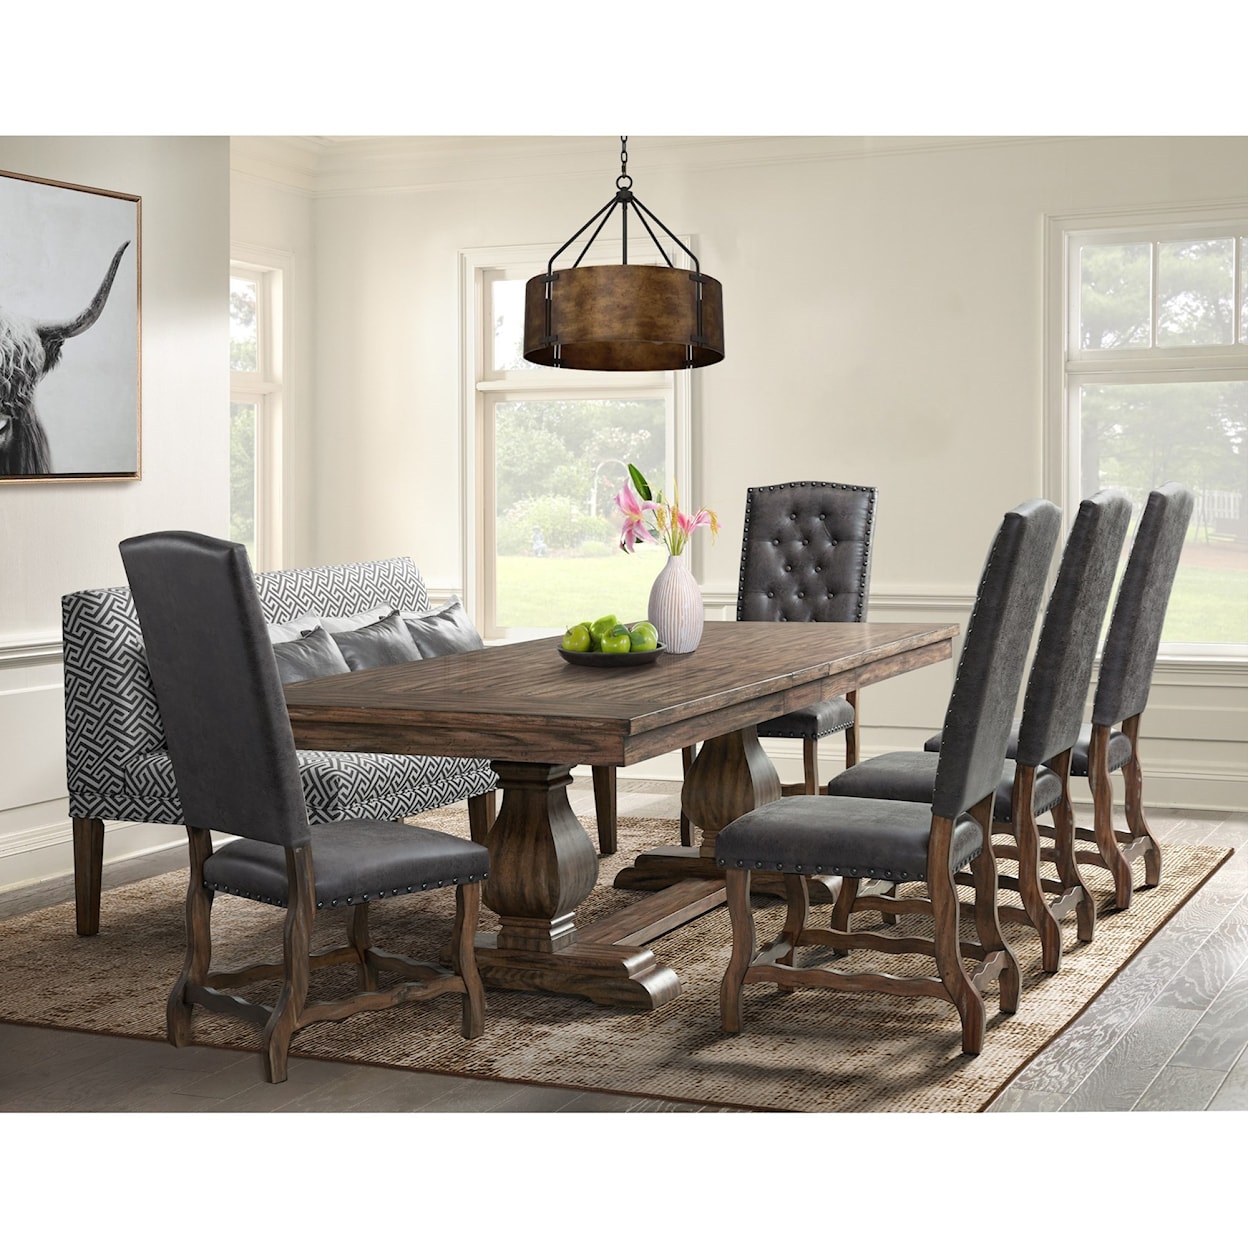 Elements Gramercy 7-Piece Table and Chair Set with Bench